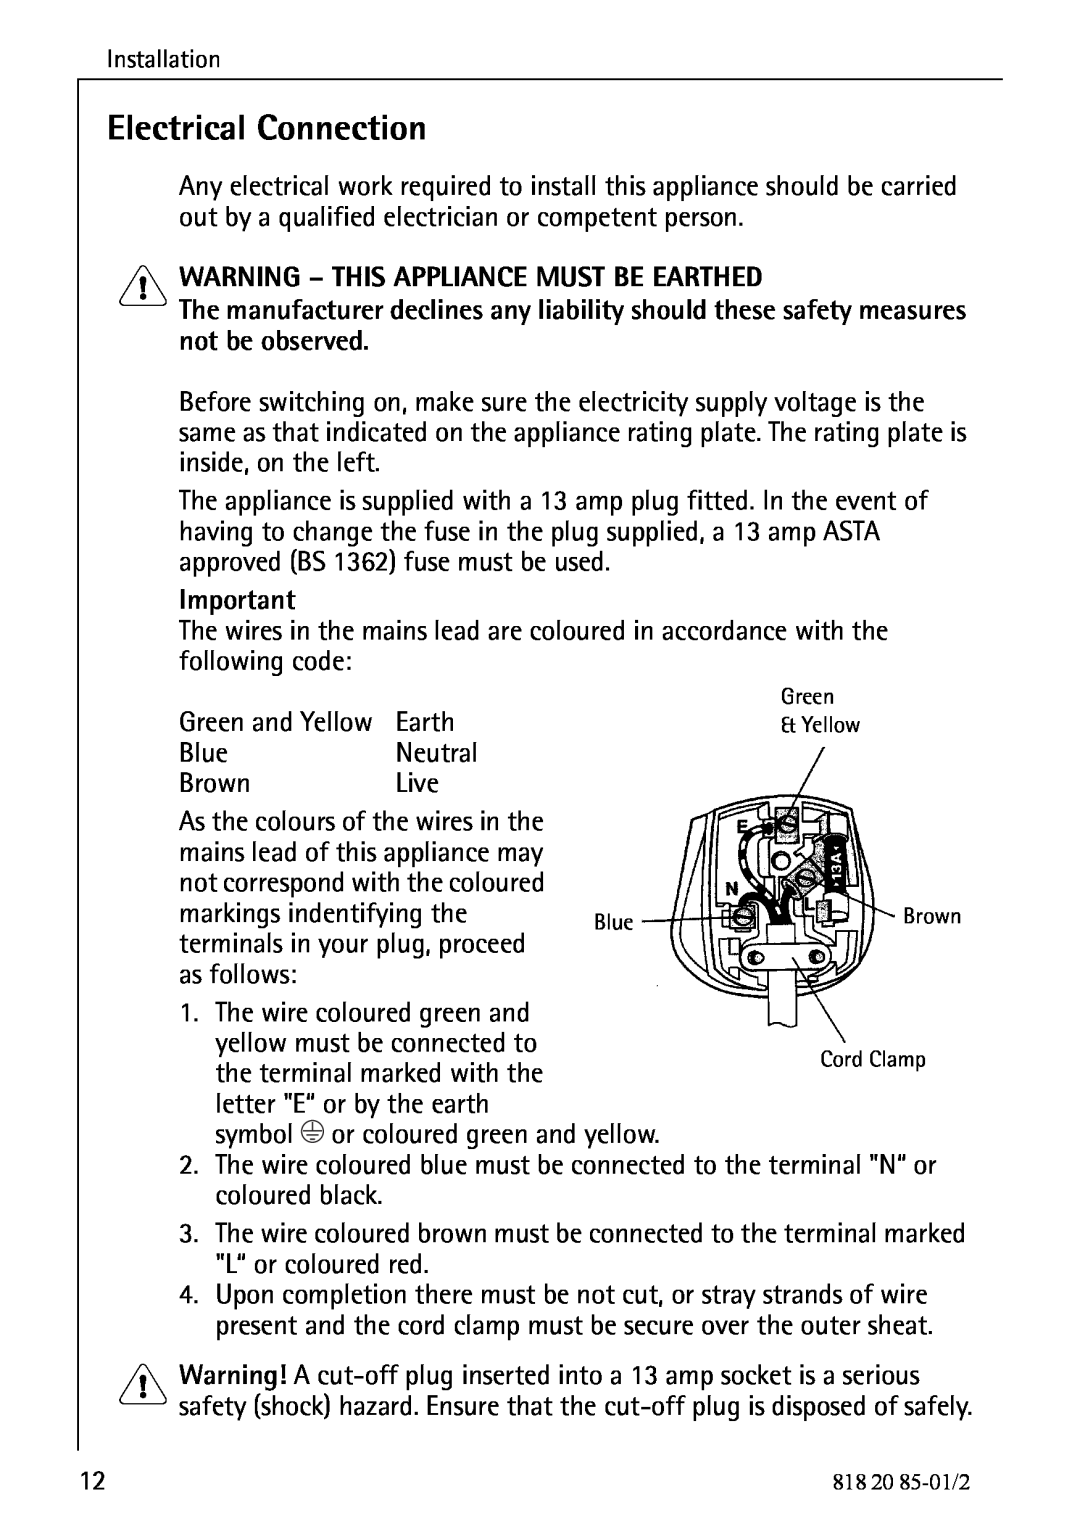 Electrolux 818 20 85 operating instructions Electrical Connection, Warning - This Appliance Must Be Earthed 